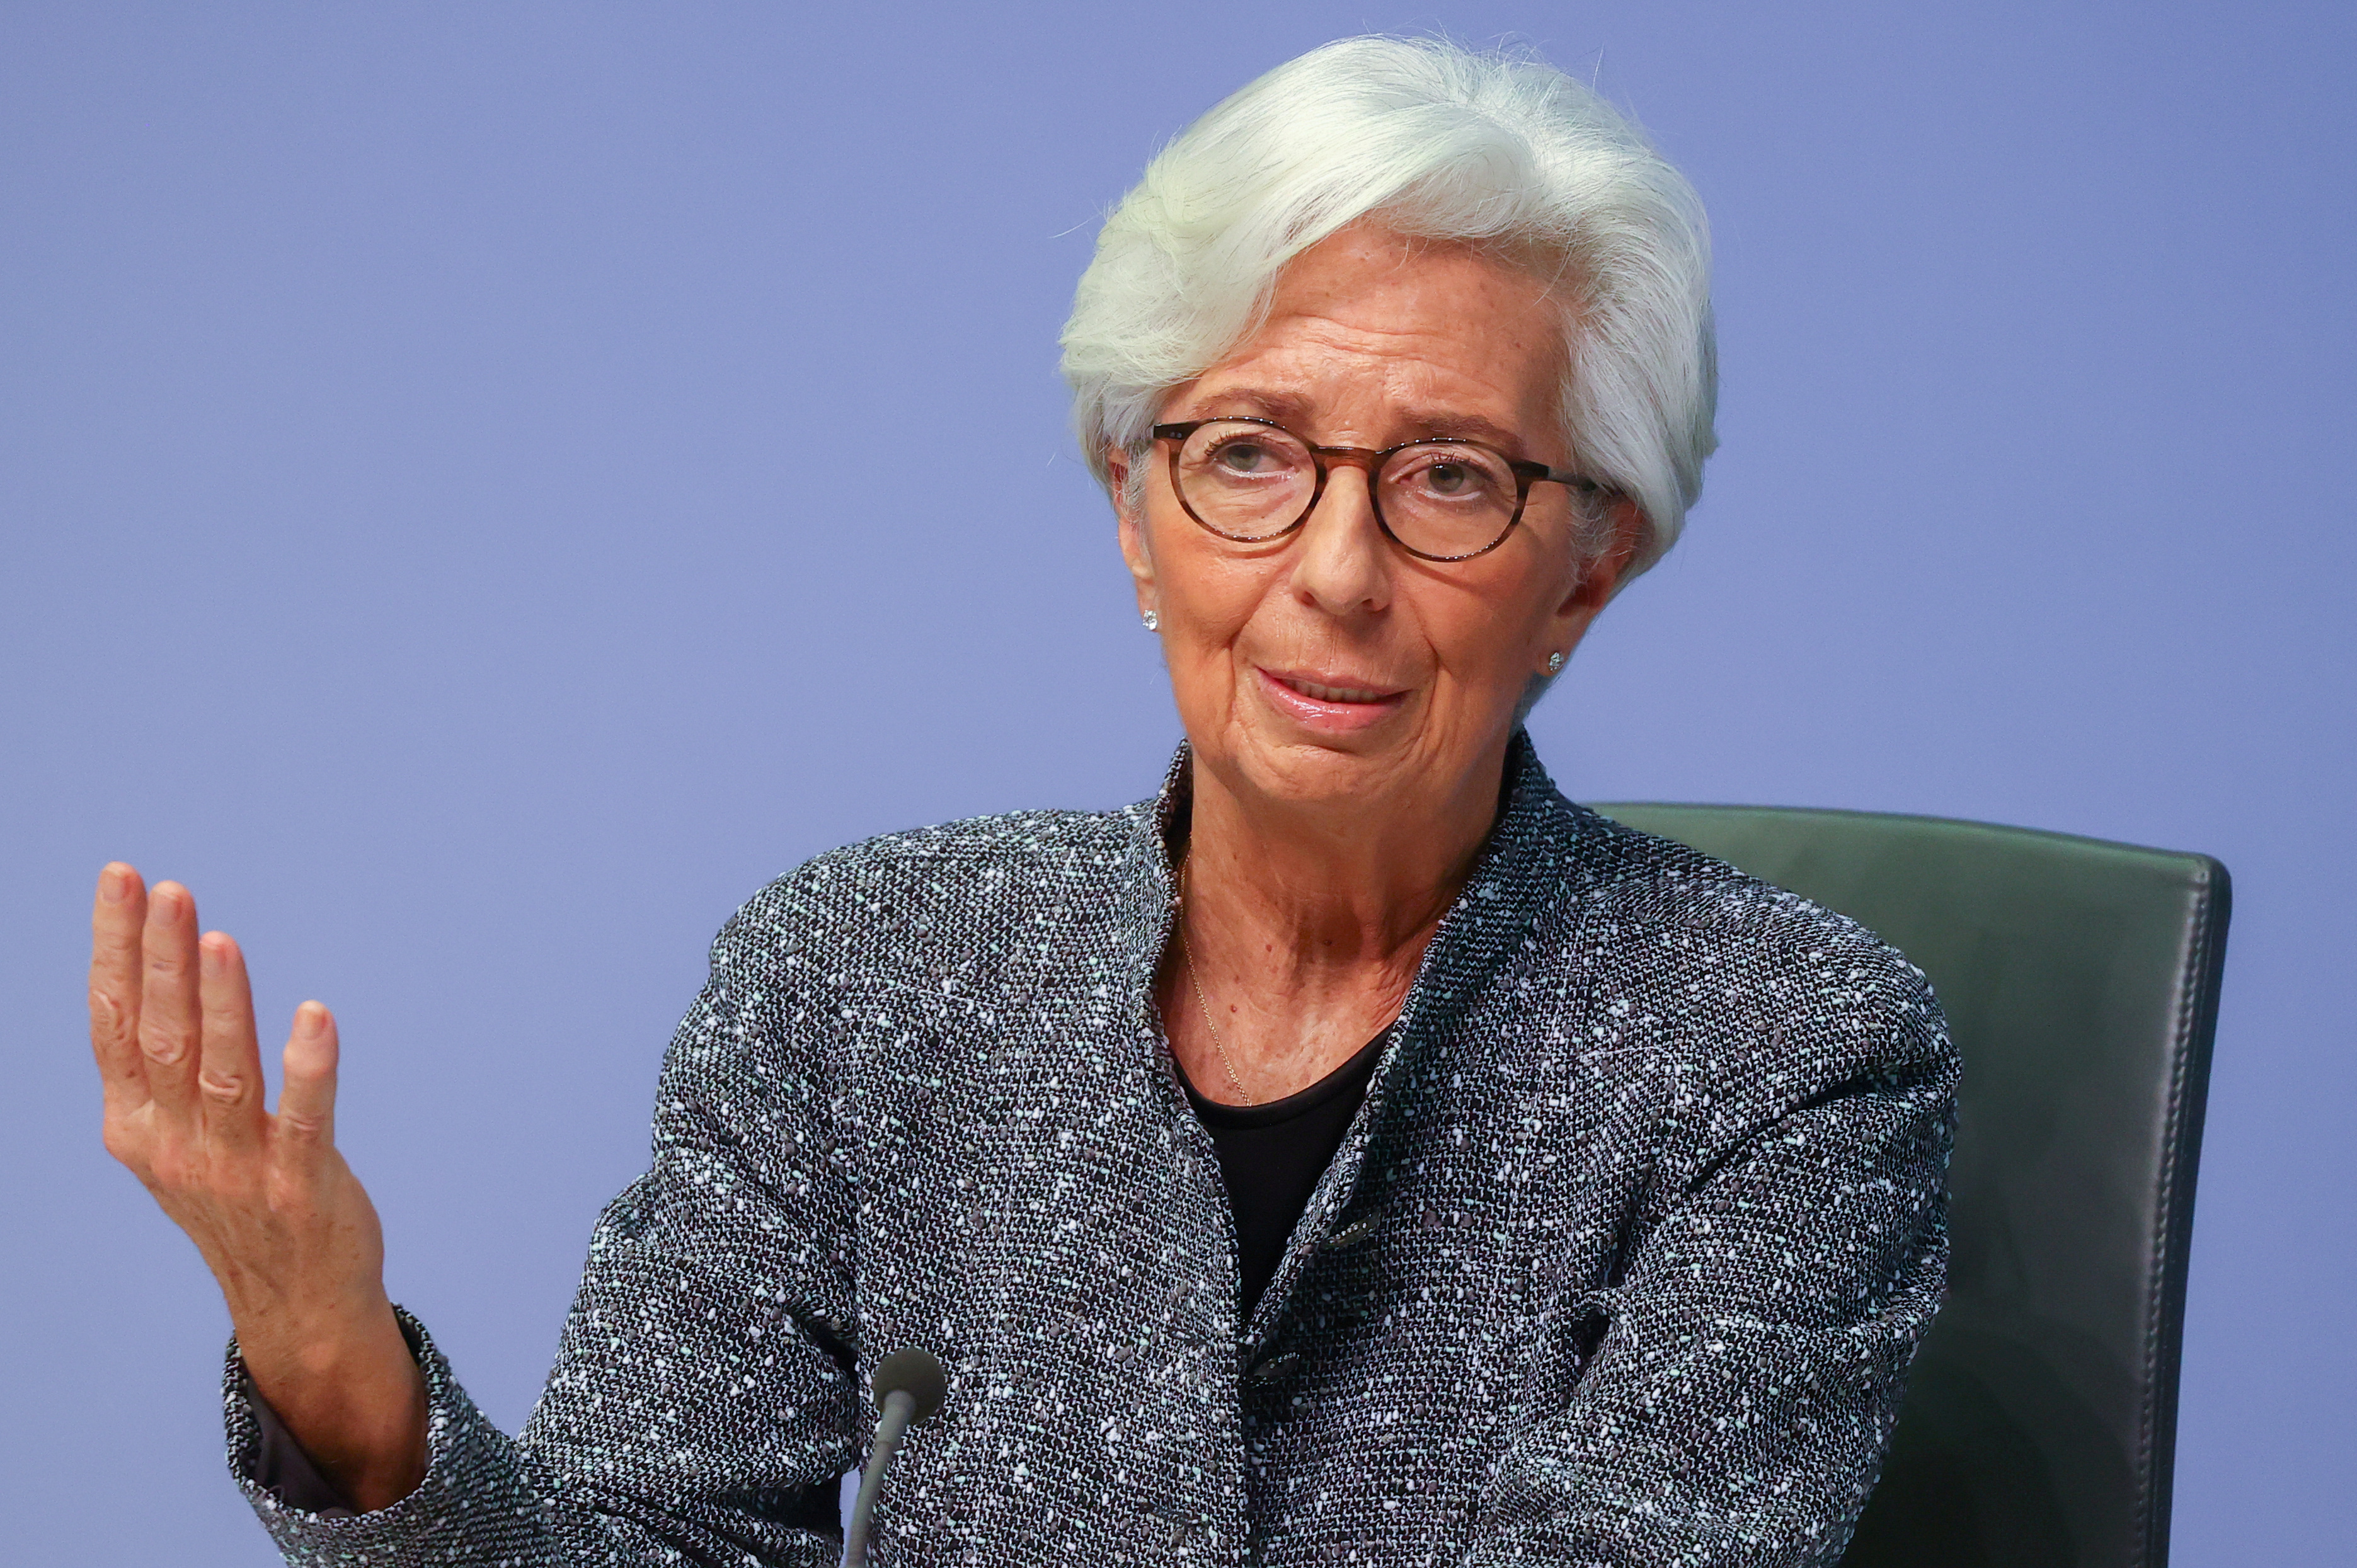 European Central Bank (ECB) President Christine Lagarde gestures as she addresses a news conference on the outcome of the meeting of the Governing Council, in Frankfurt